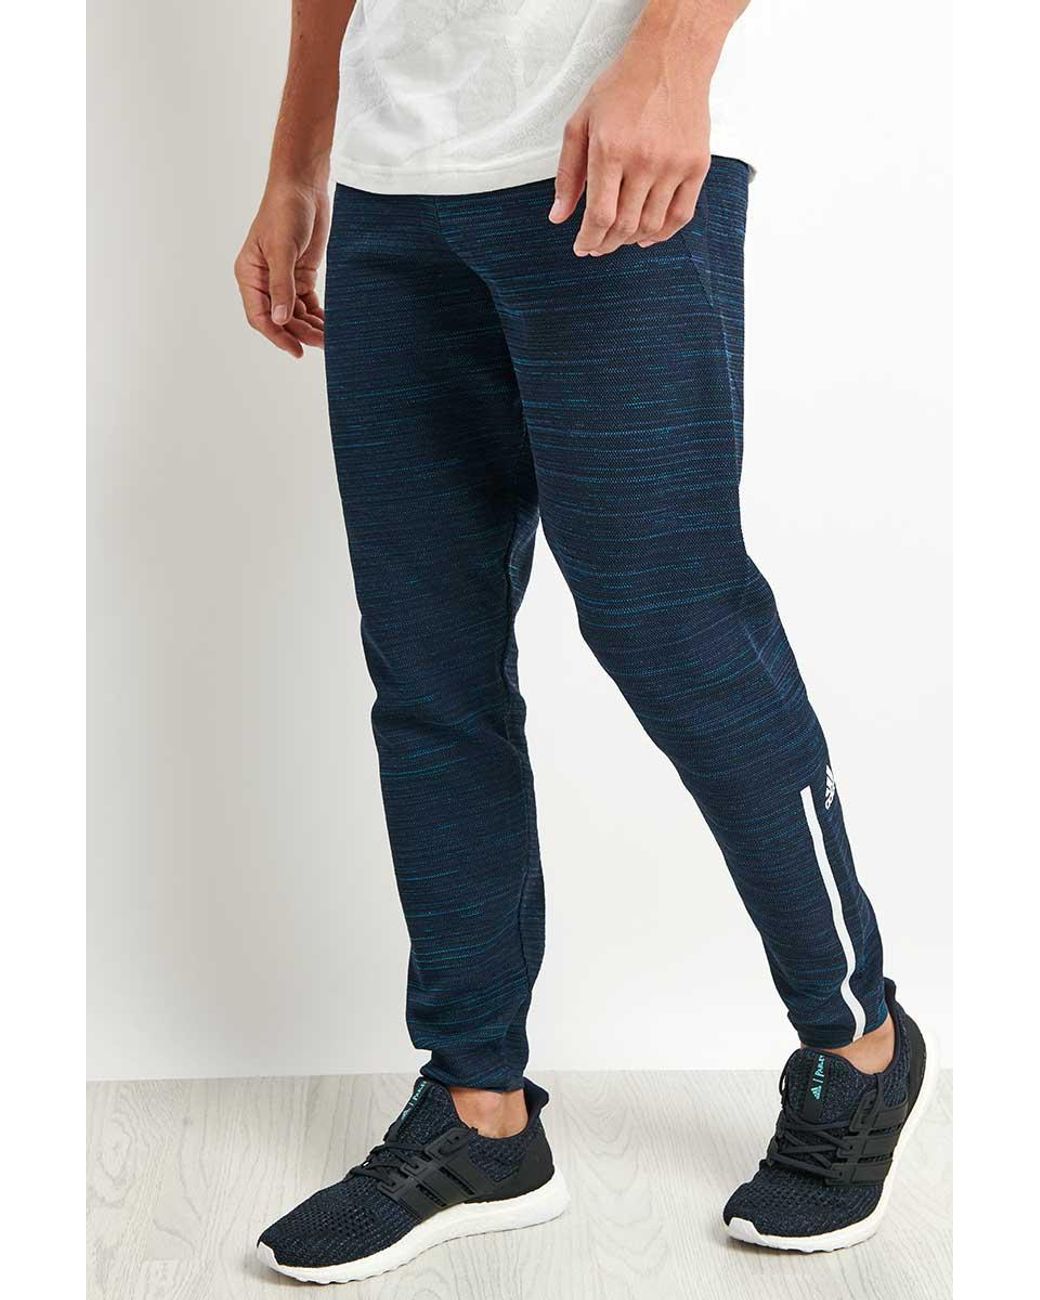 adidas Z.n.e Parley Pant in Blue | Lyst UK